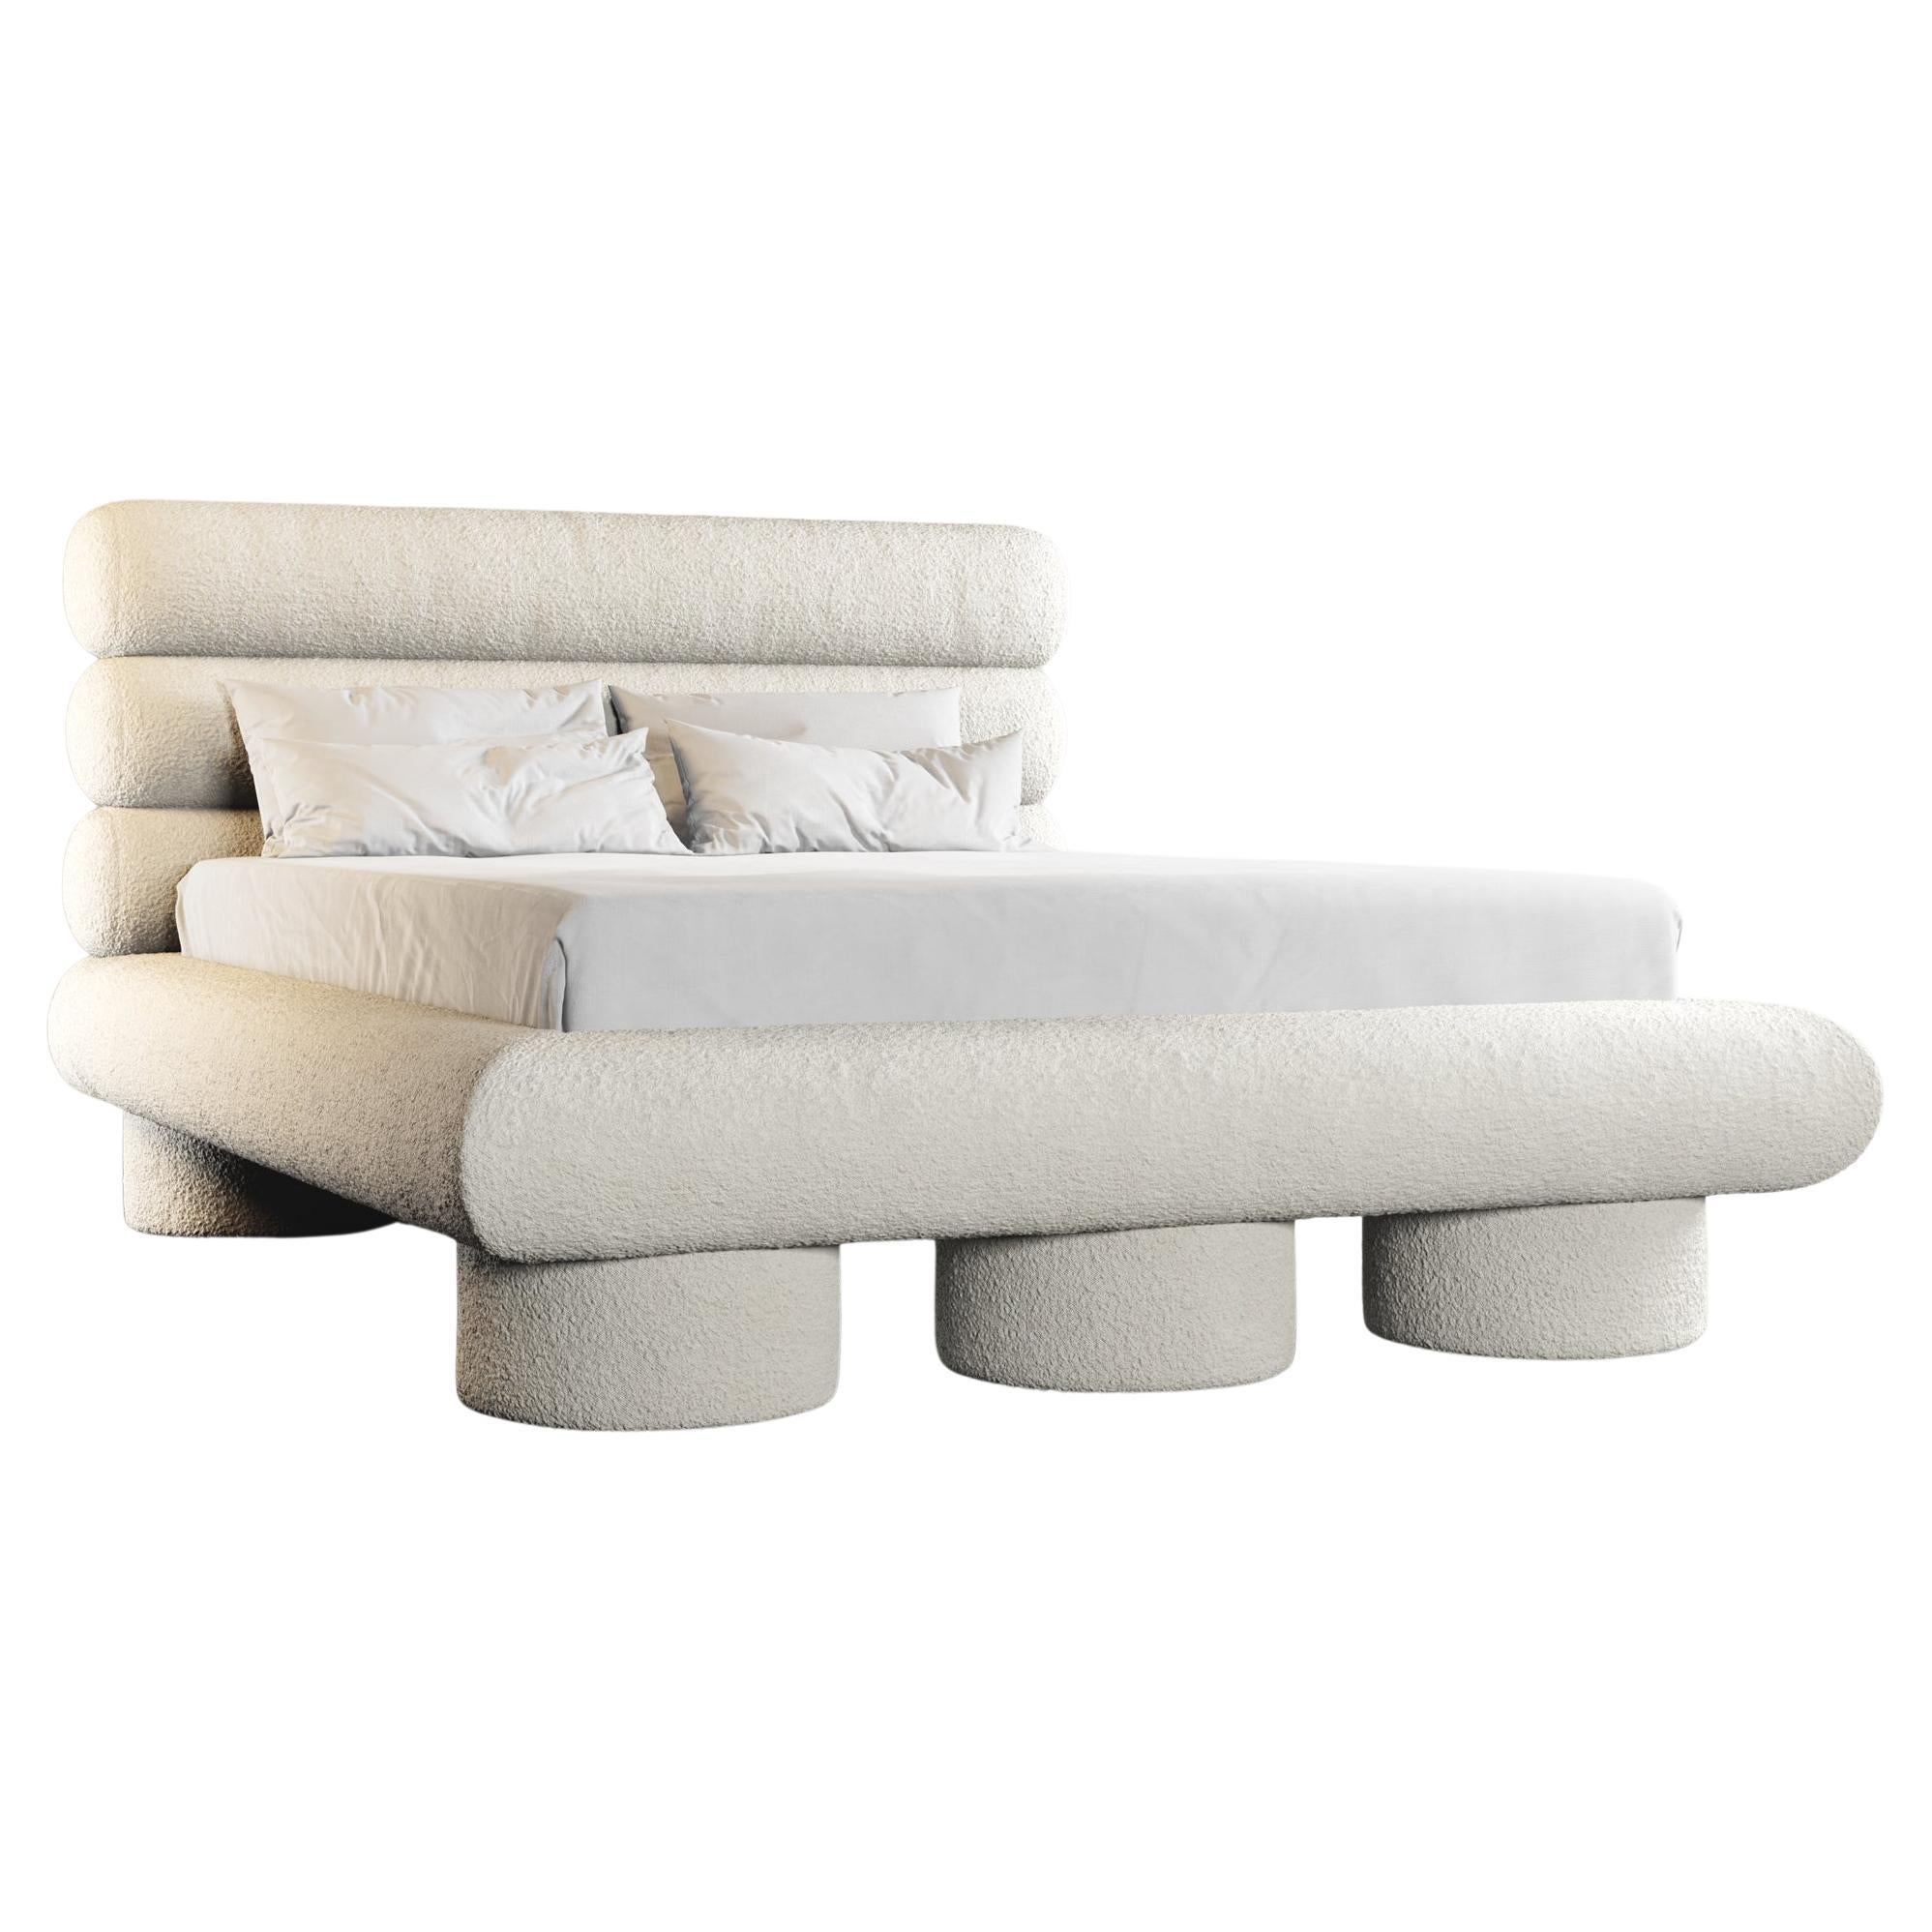 Dip Bed - Modern Design in Cloud Boucle For Sale